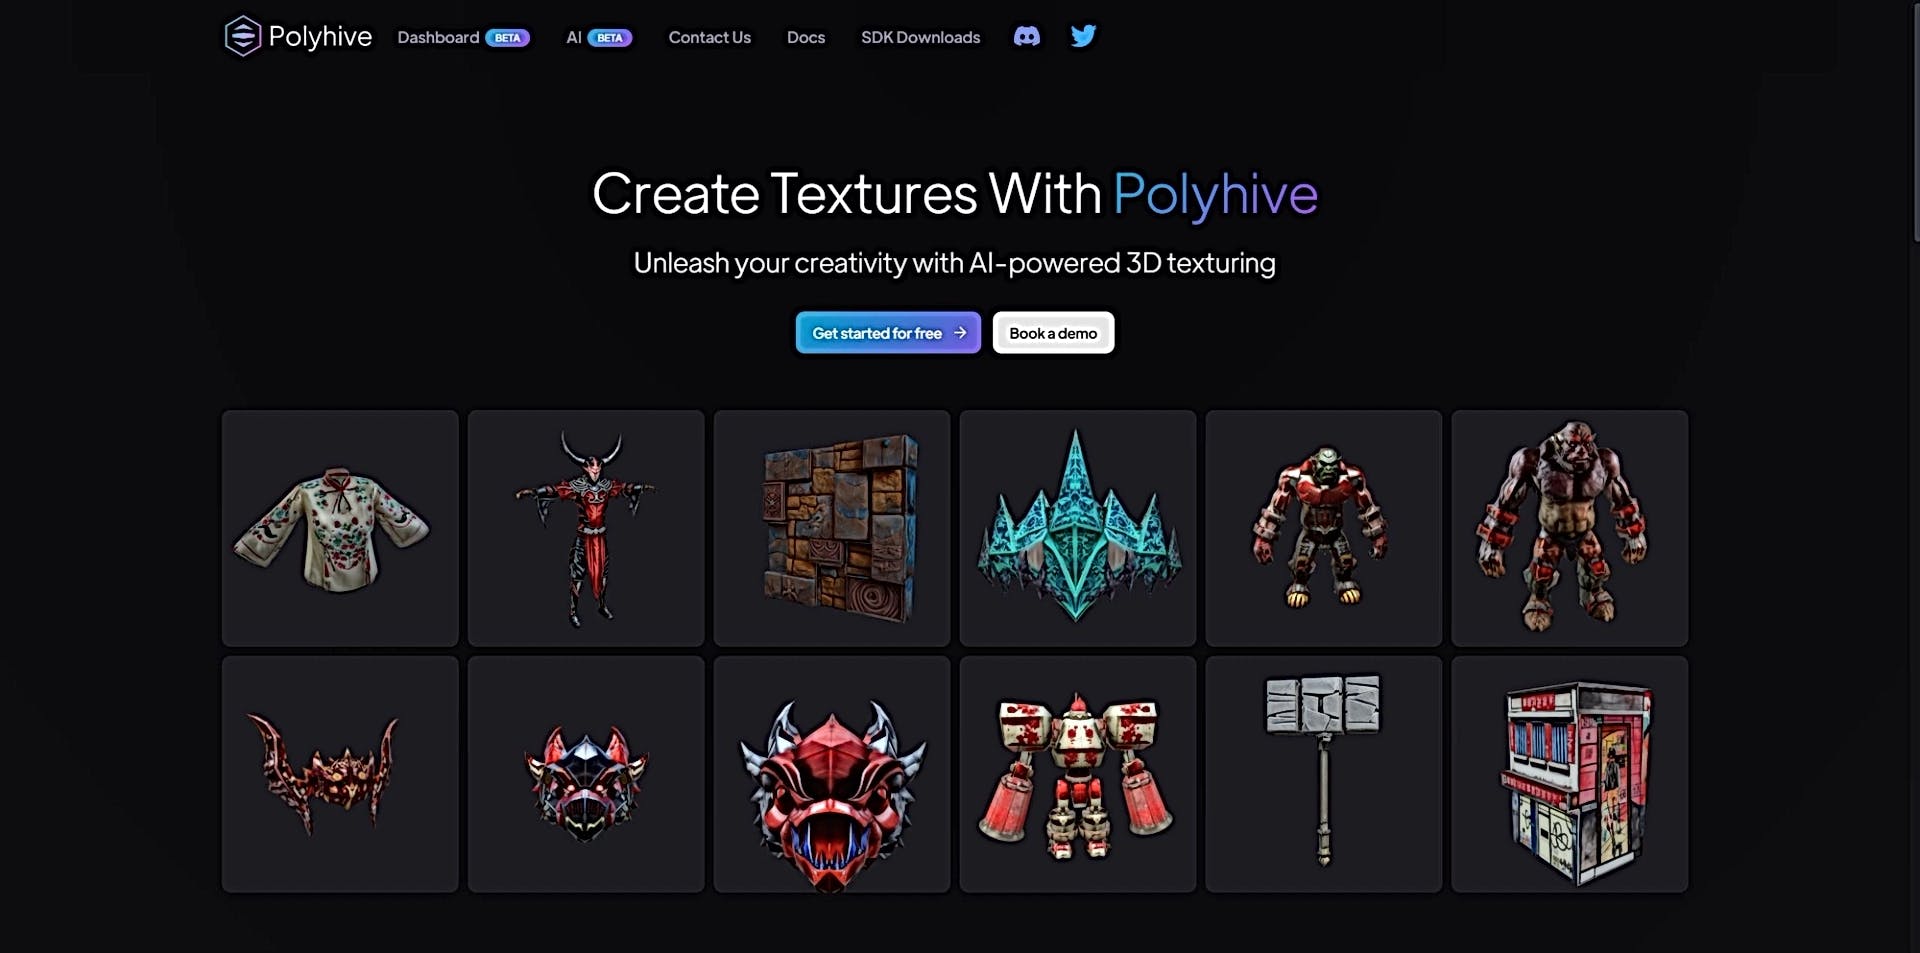 Polyhive featured